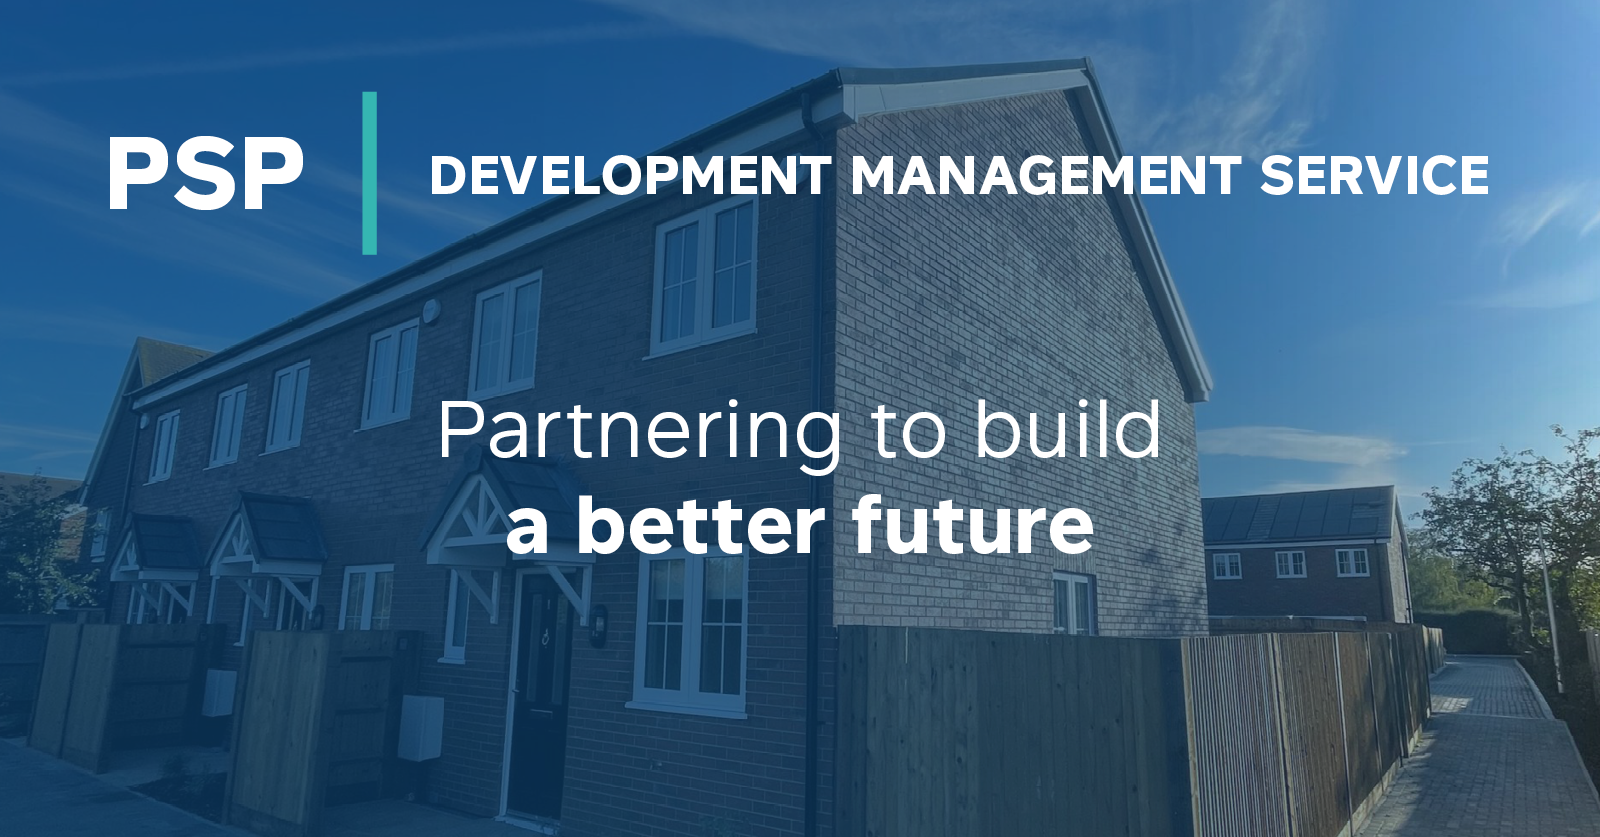 PSP launches new Development Management Service to help housing associations and councils accelerate development of zero carbon homes